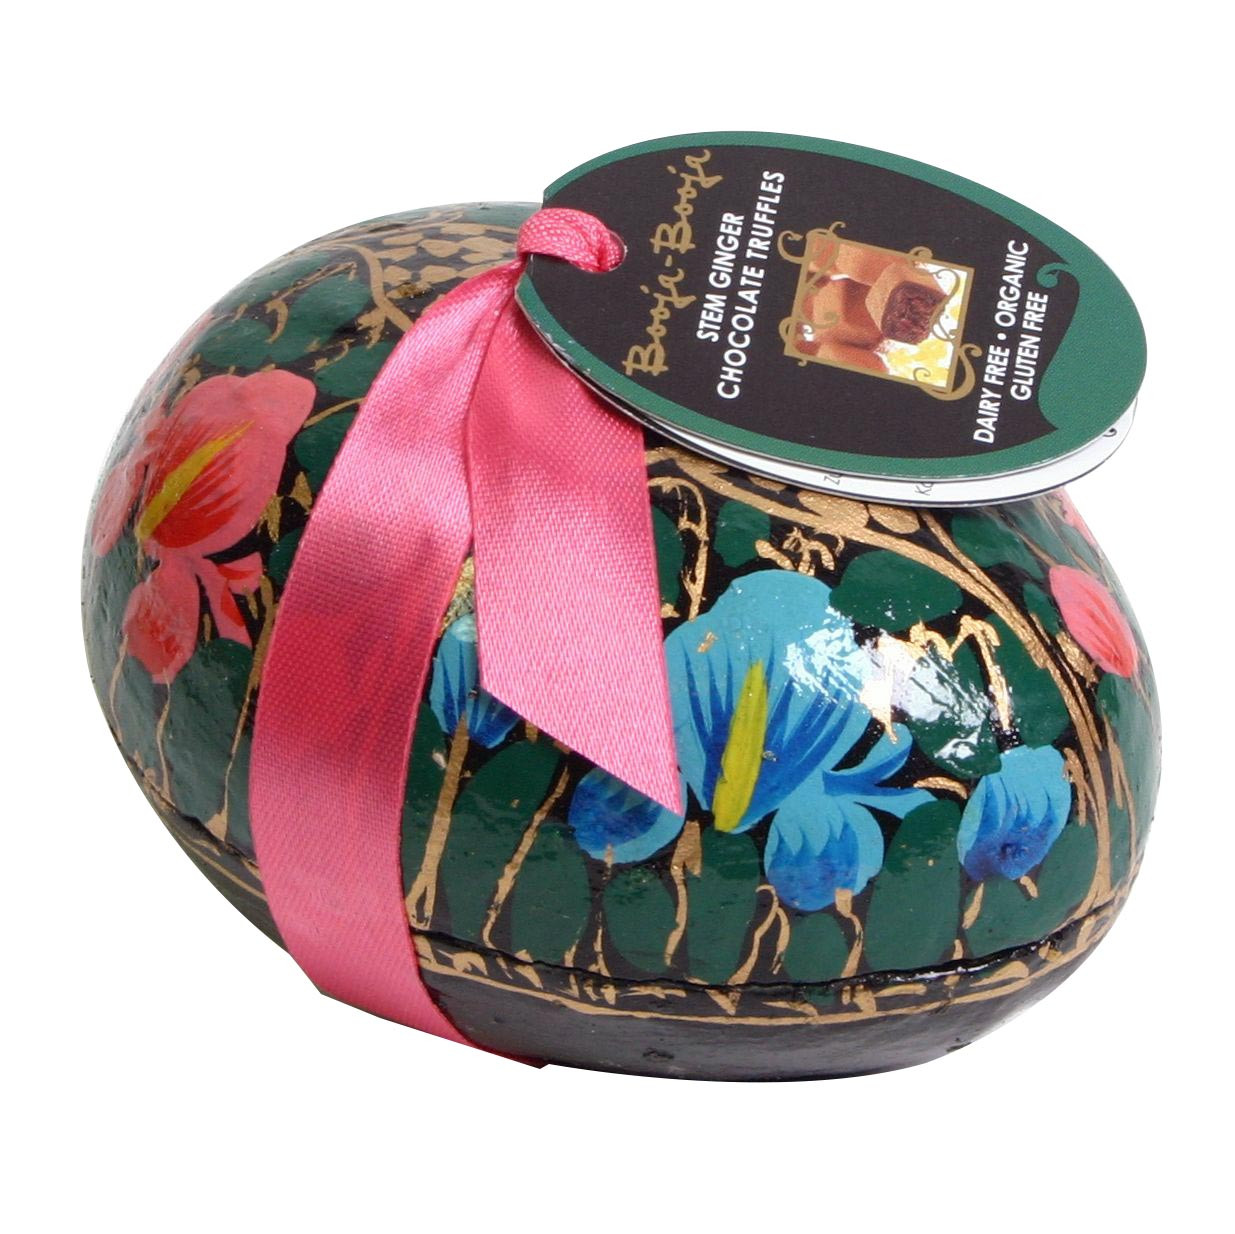 Easter egg hand-painted with BIO champagne truffle - Pralines, Truffle, gluten free, laktose free, milk protein free, soy free chocolate, vegan chocolate, England, english chocolate, Chocolate with alcohol - Chocolats-De-Luxe